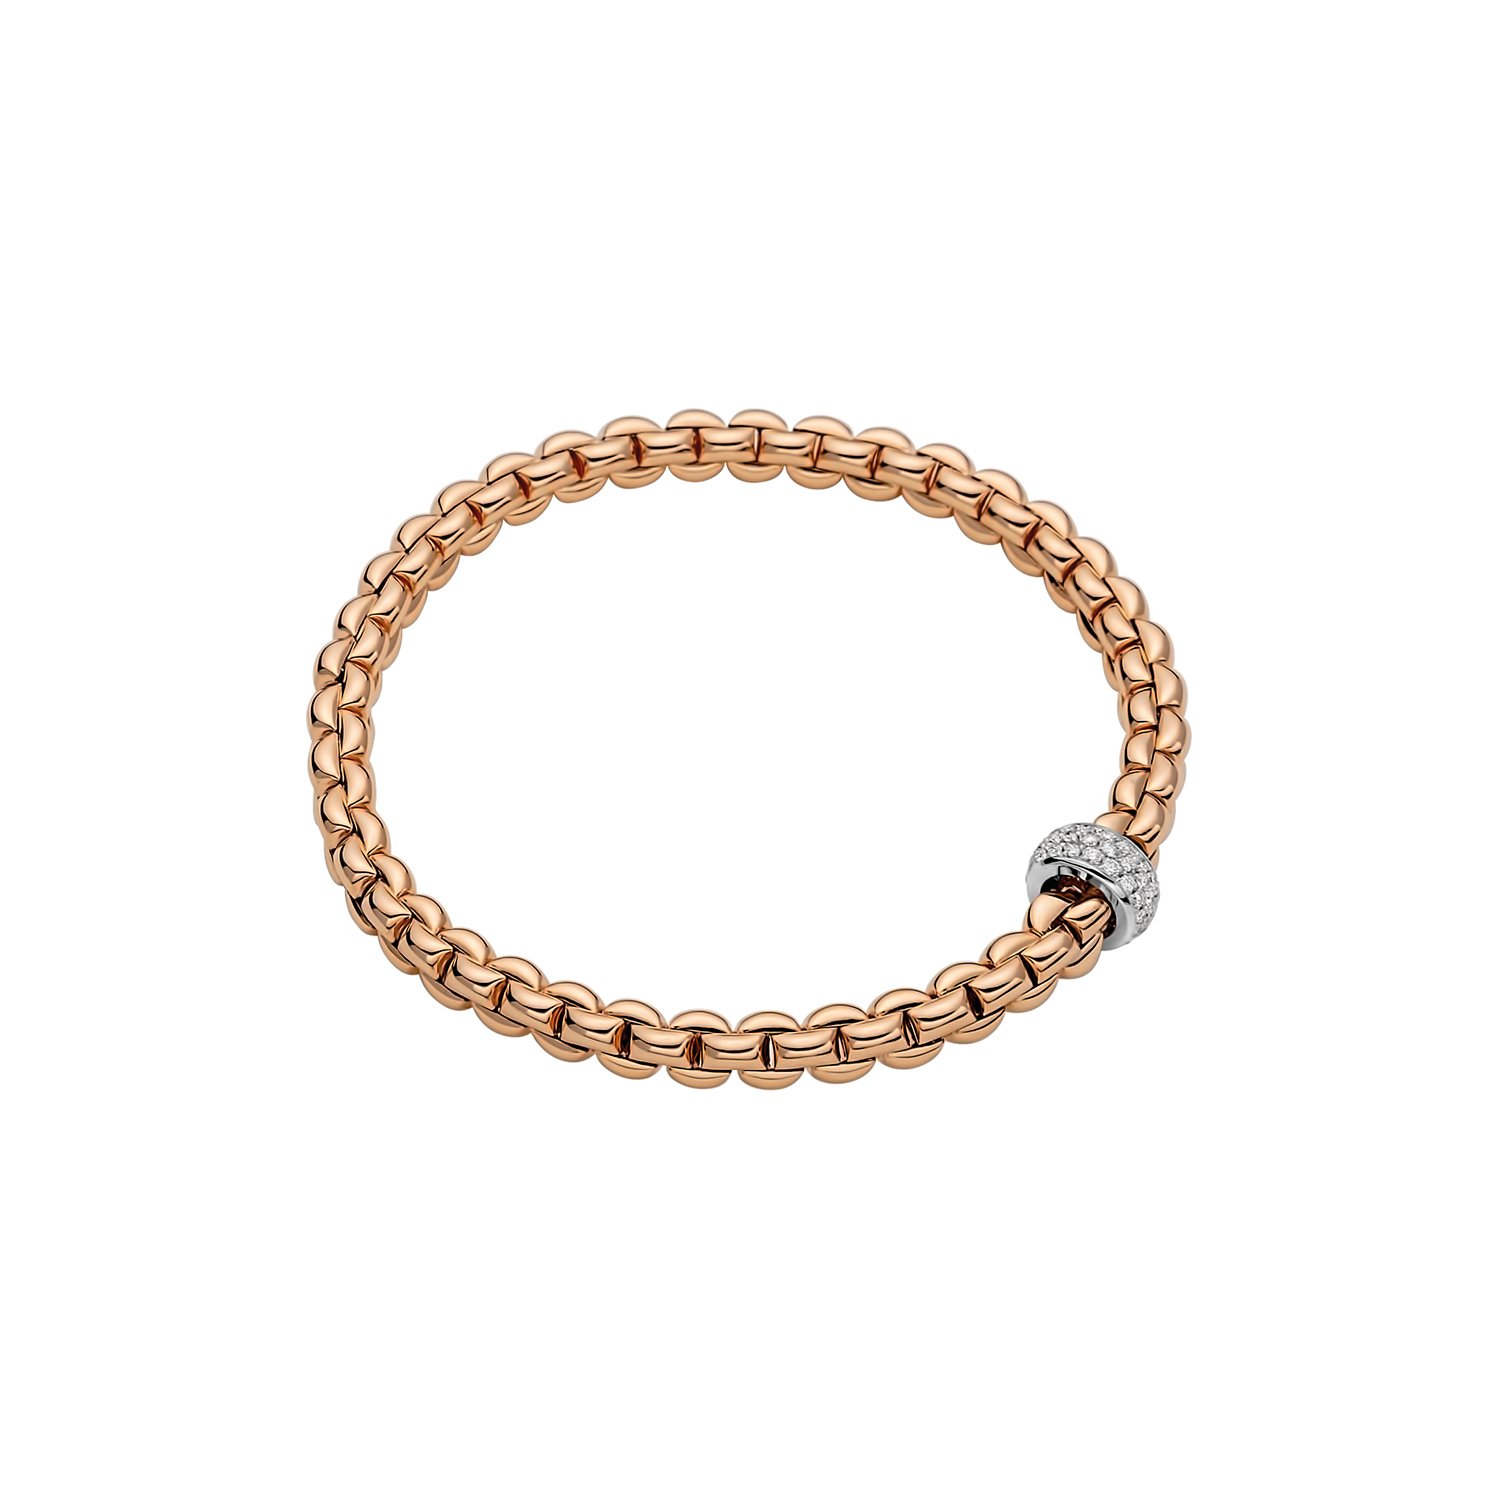 Eka Bracelet in 18kt Rose Gold with 1 White Gold and White Diamond Pave Element - 5.6mm - Size S